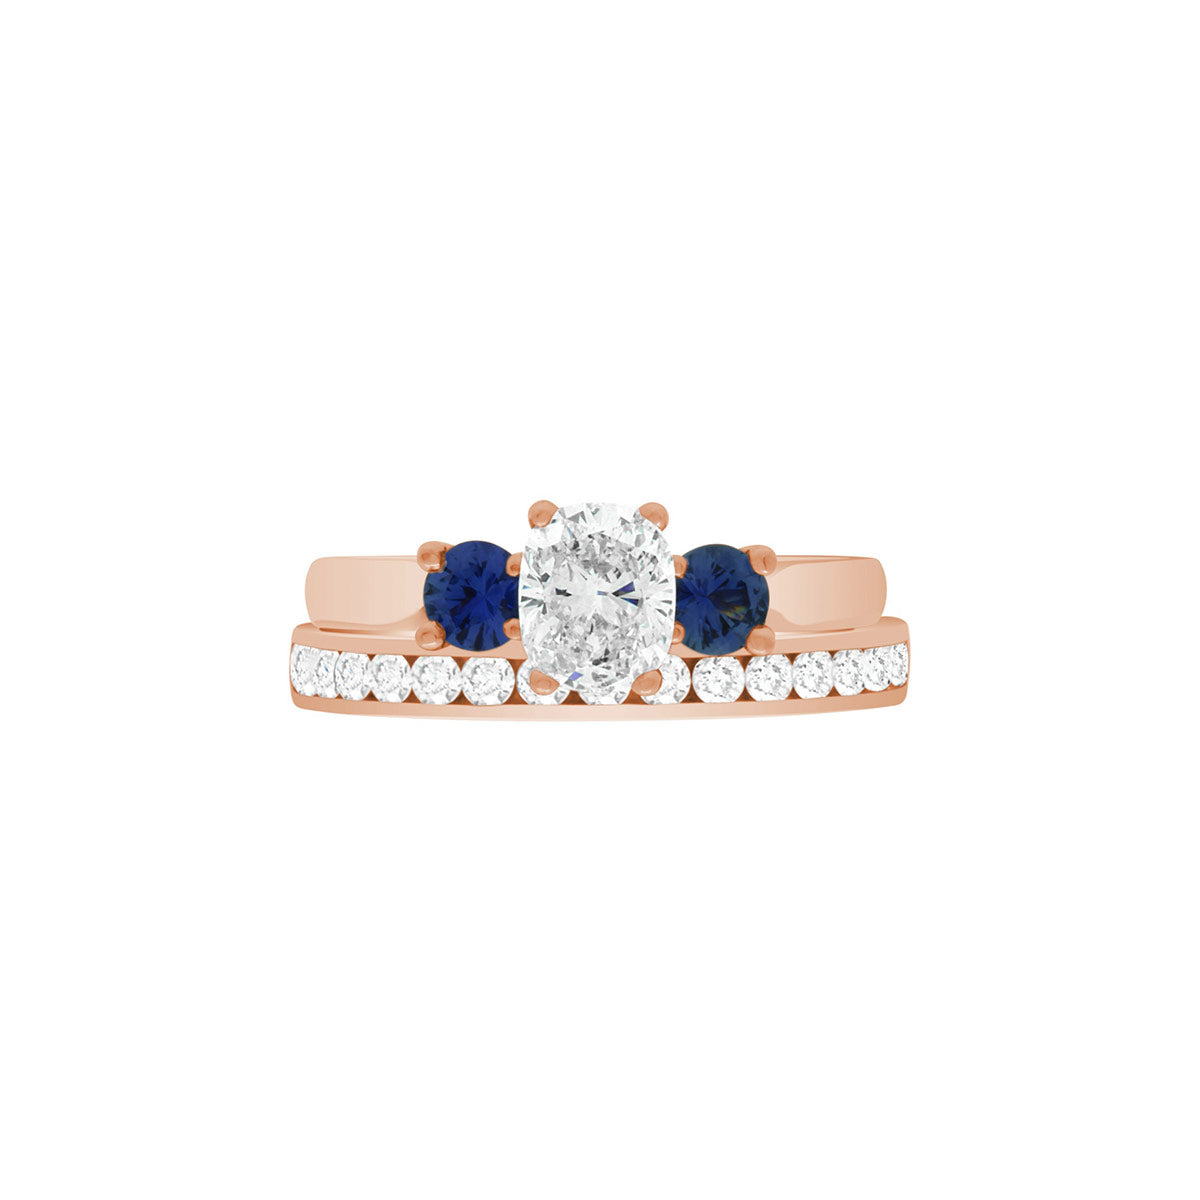 Diamond Sapphire Trilogy set in rose gold pictured with a rose gold and diamond wedding ring